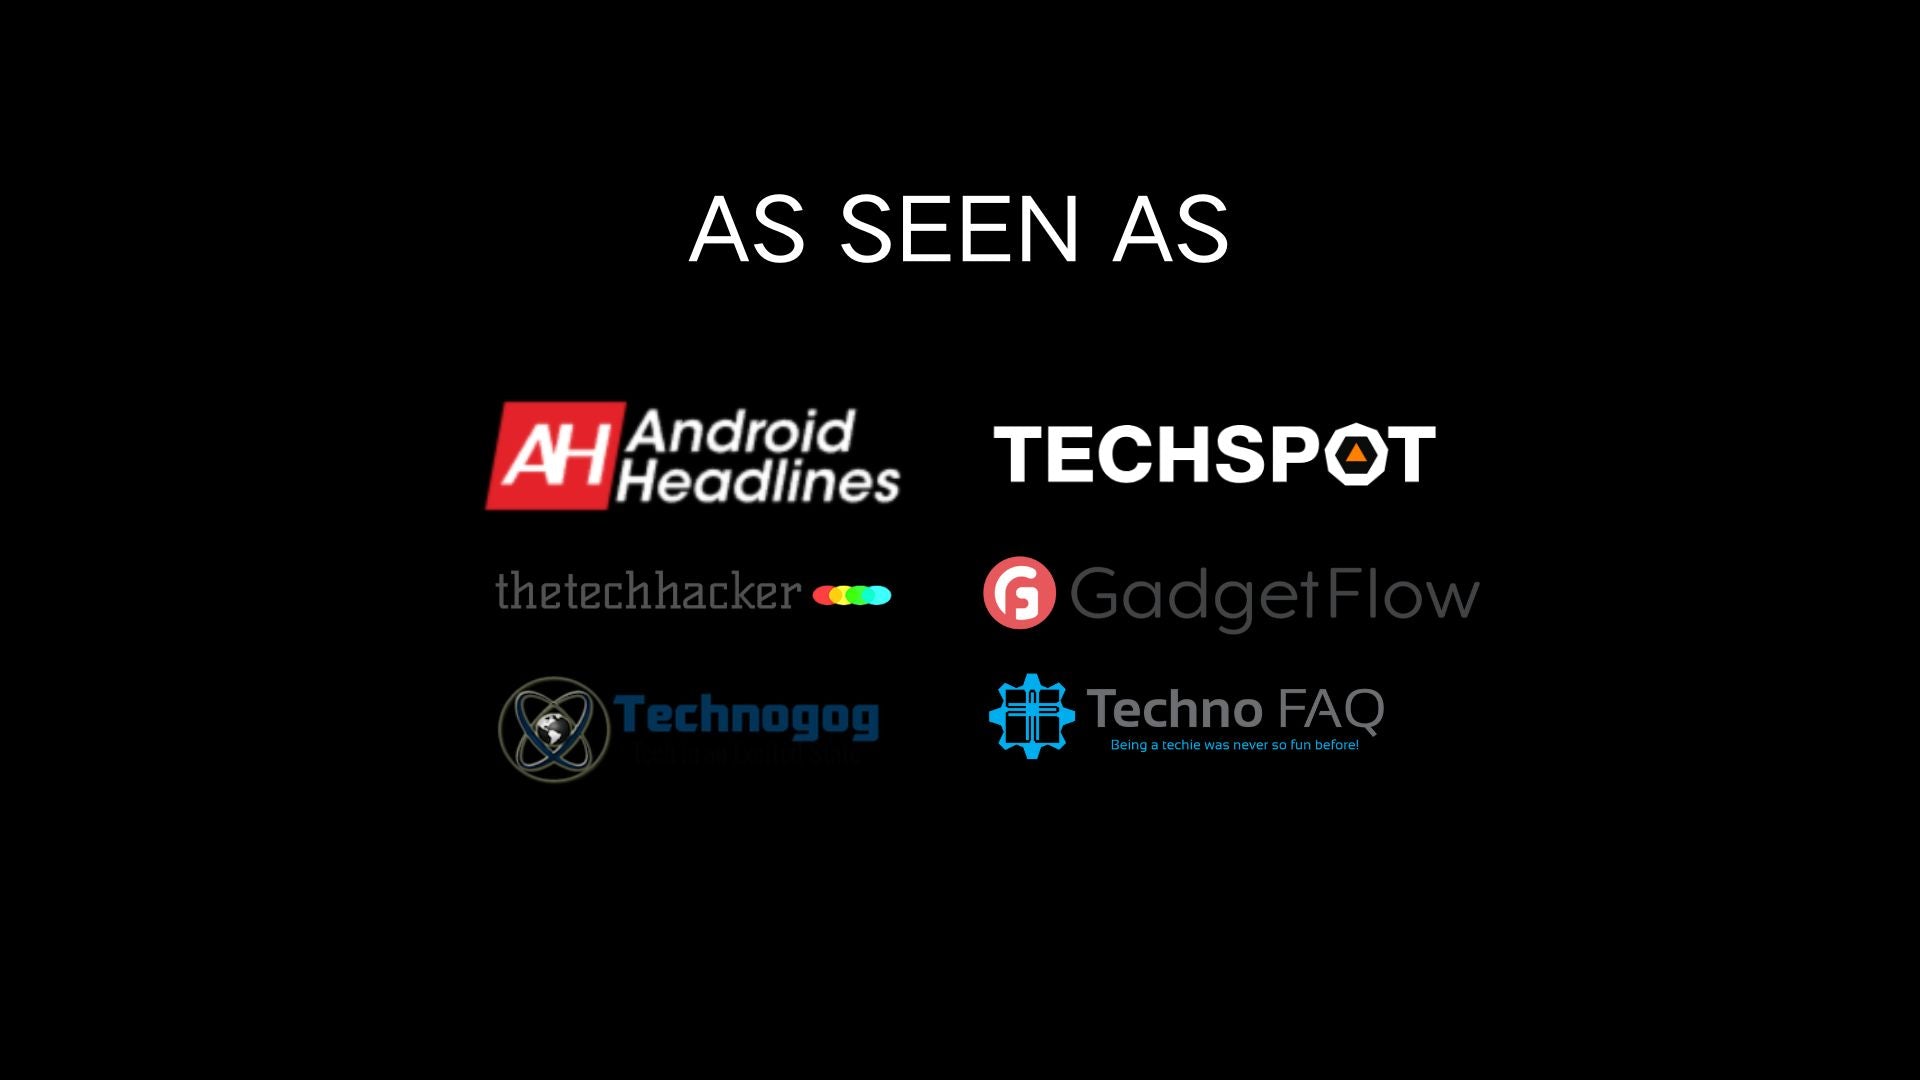 Featured on Android Headlines, Techspot, gadgetflow and more